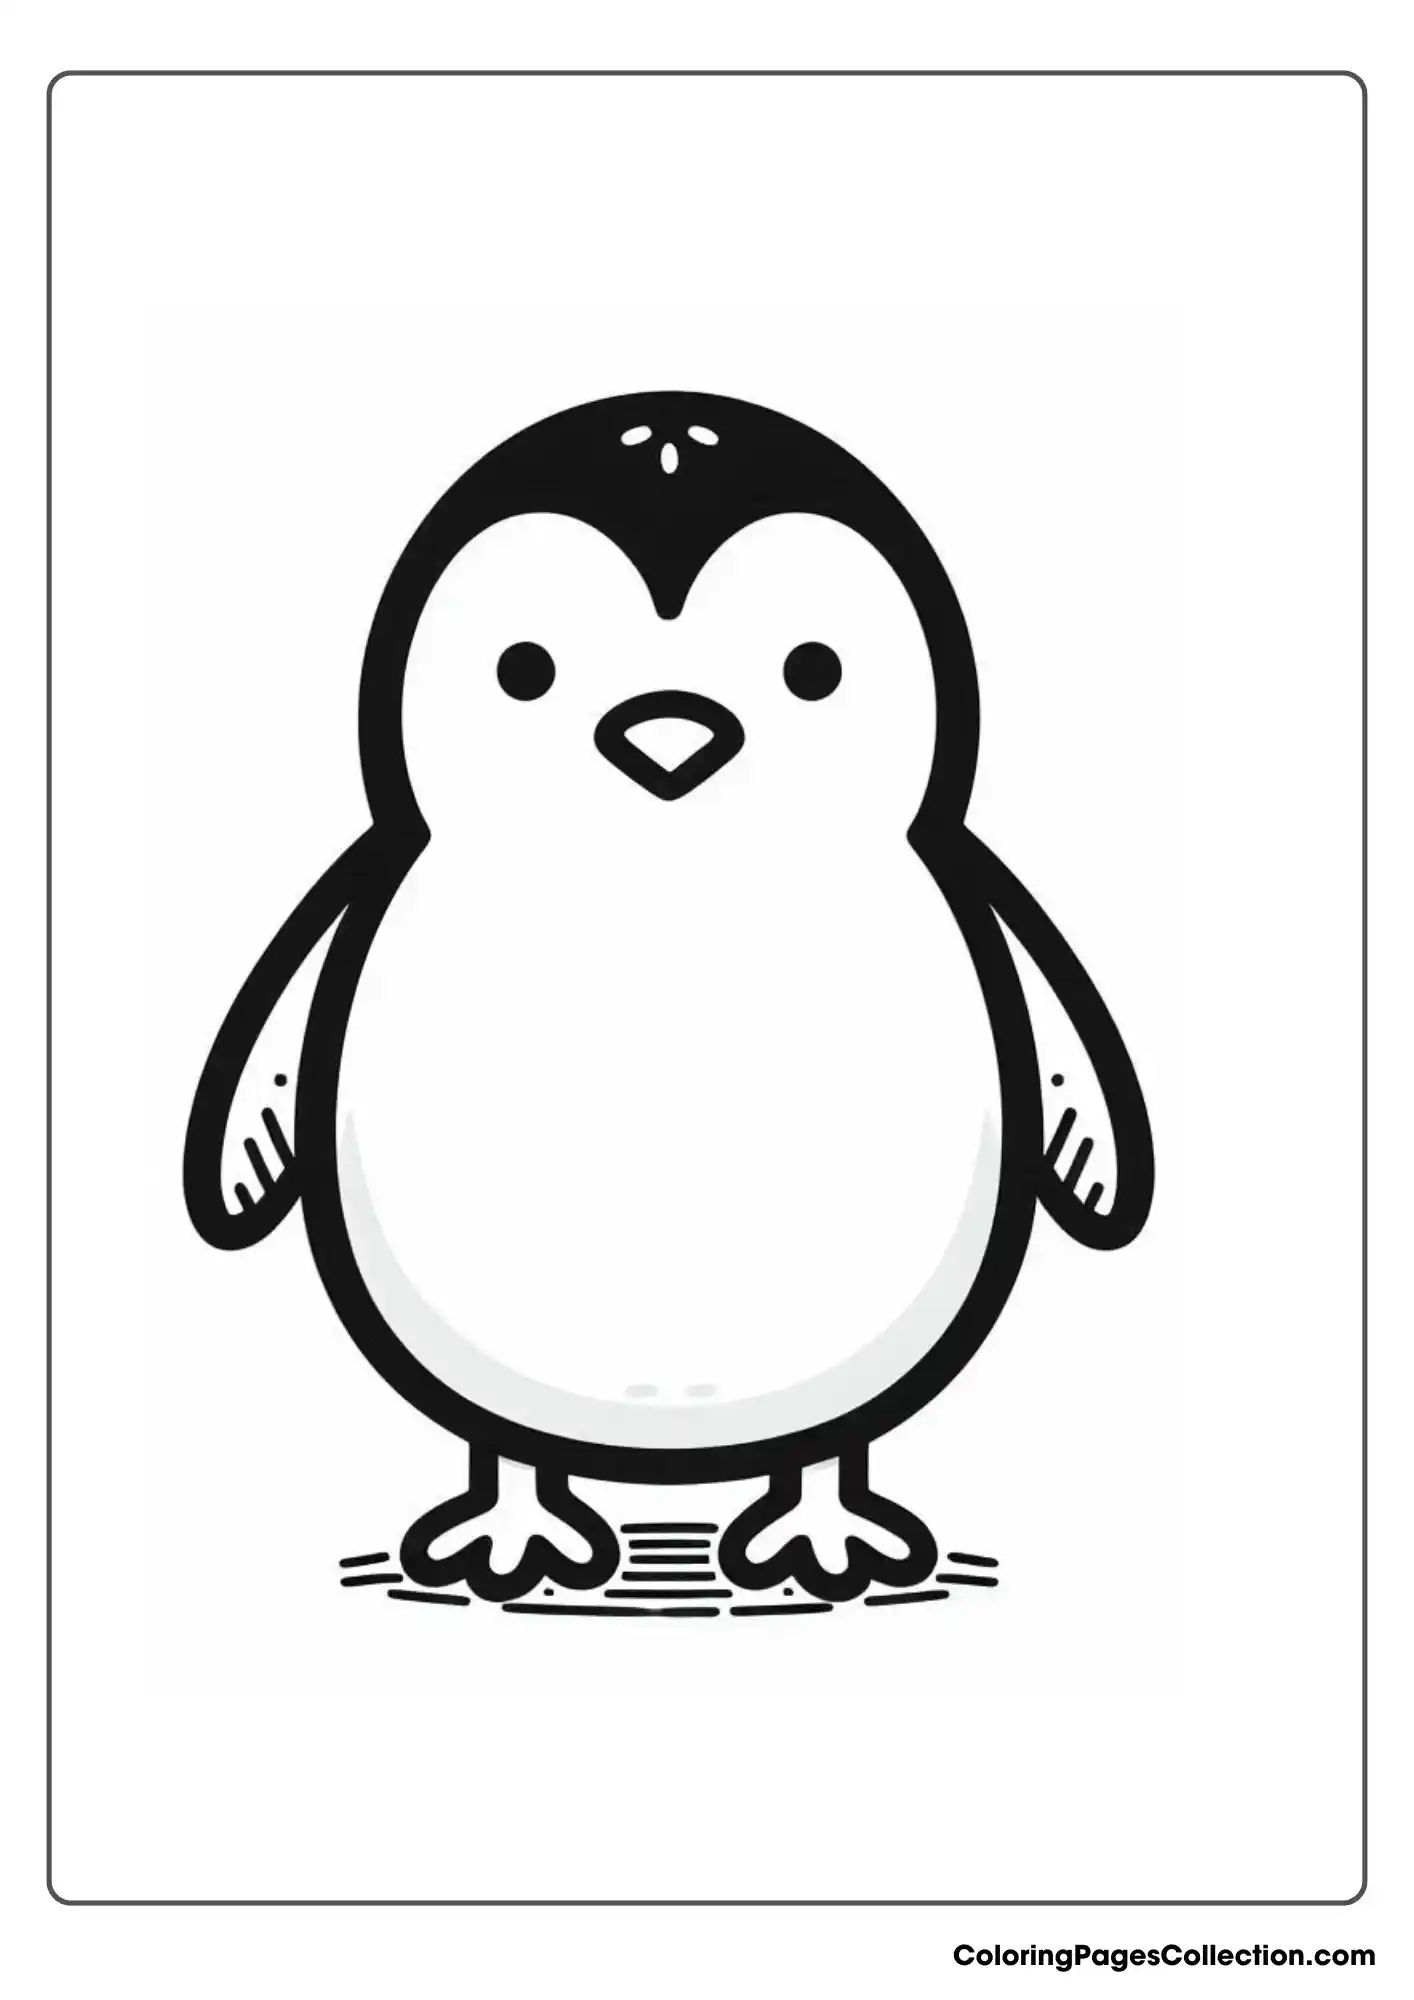 A penguin standing upright